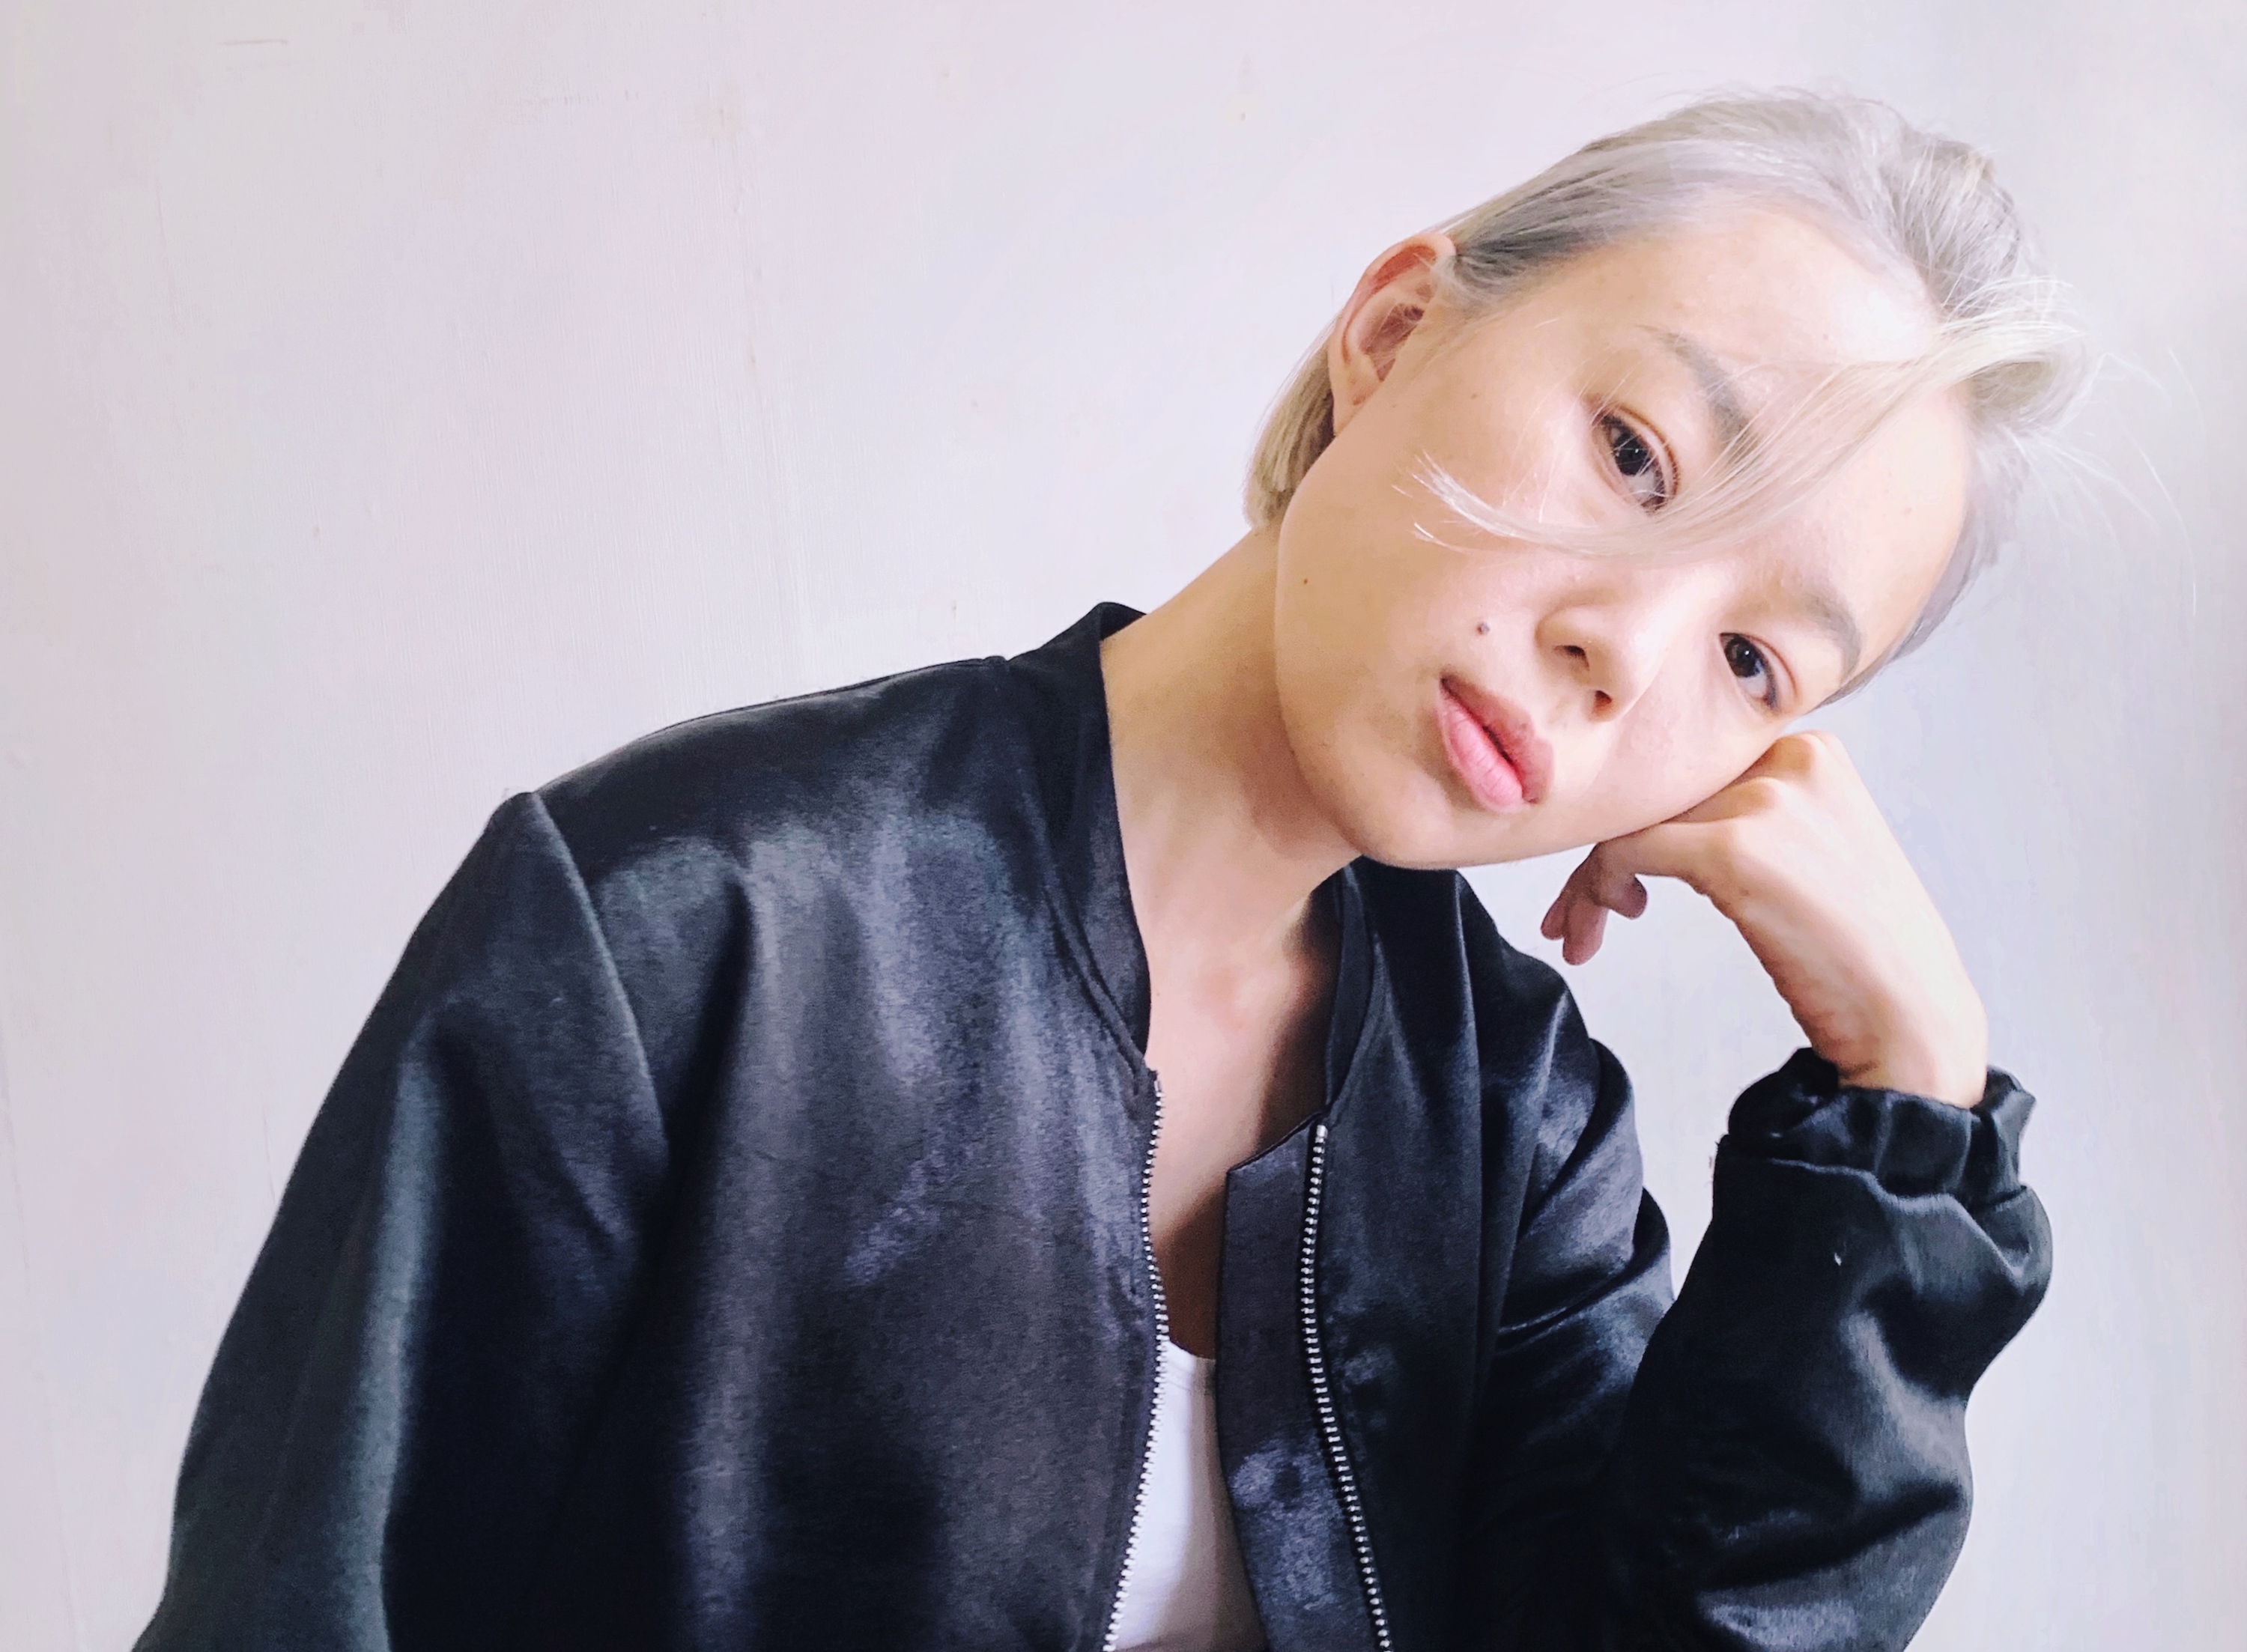 Interview: Amanda Lee Koe speaks about her creative process